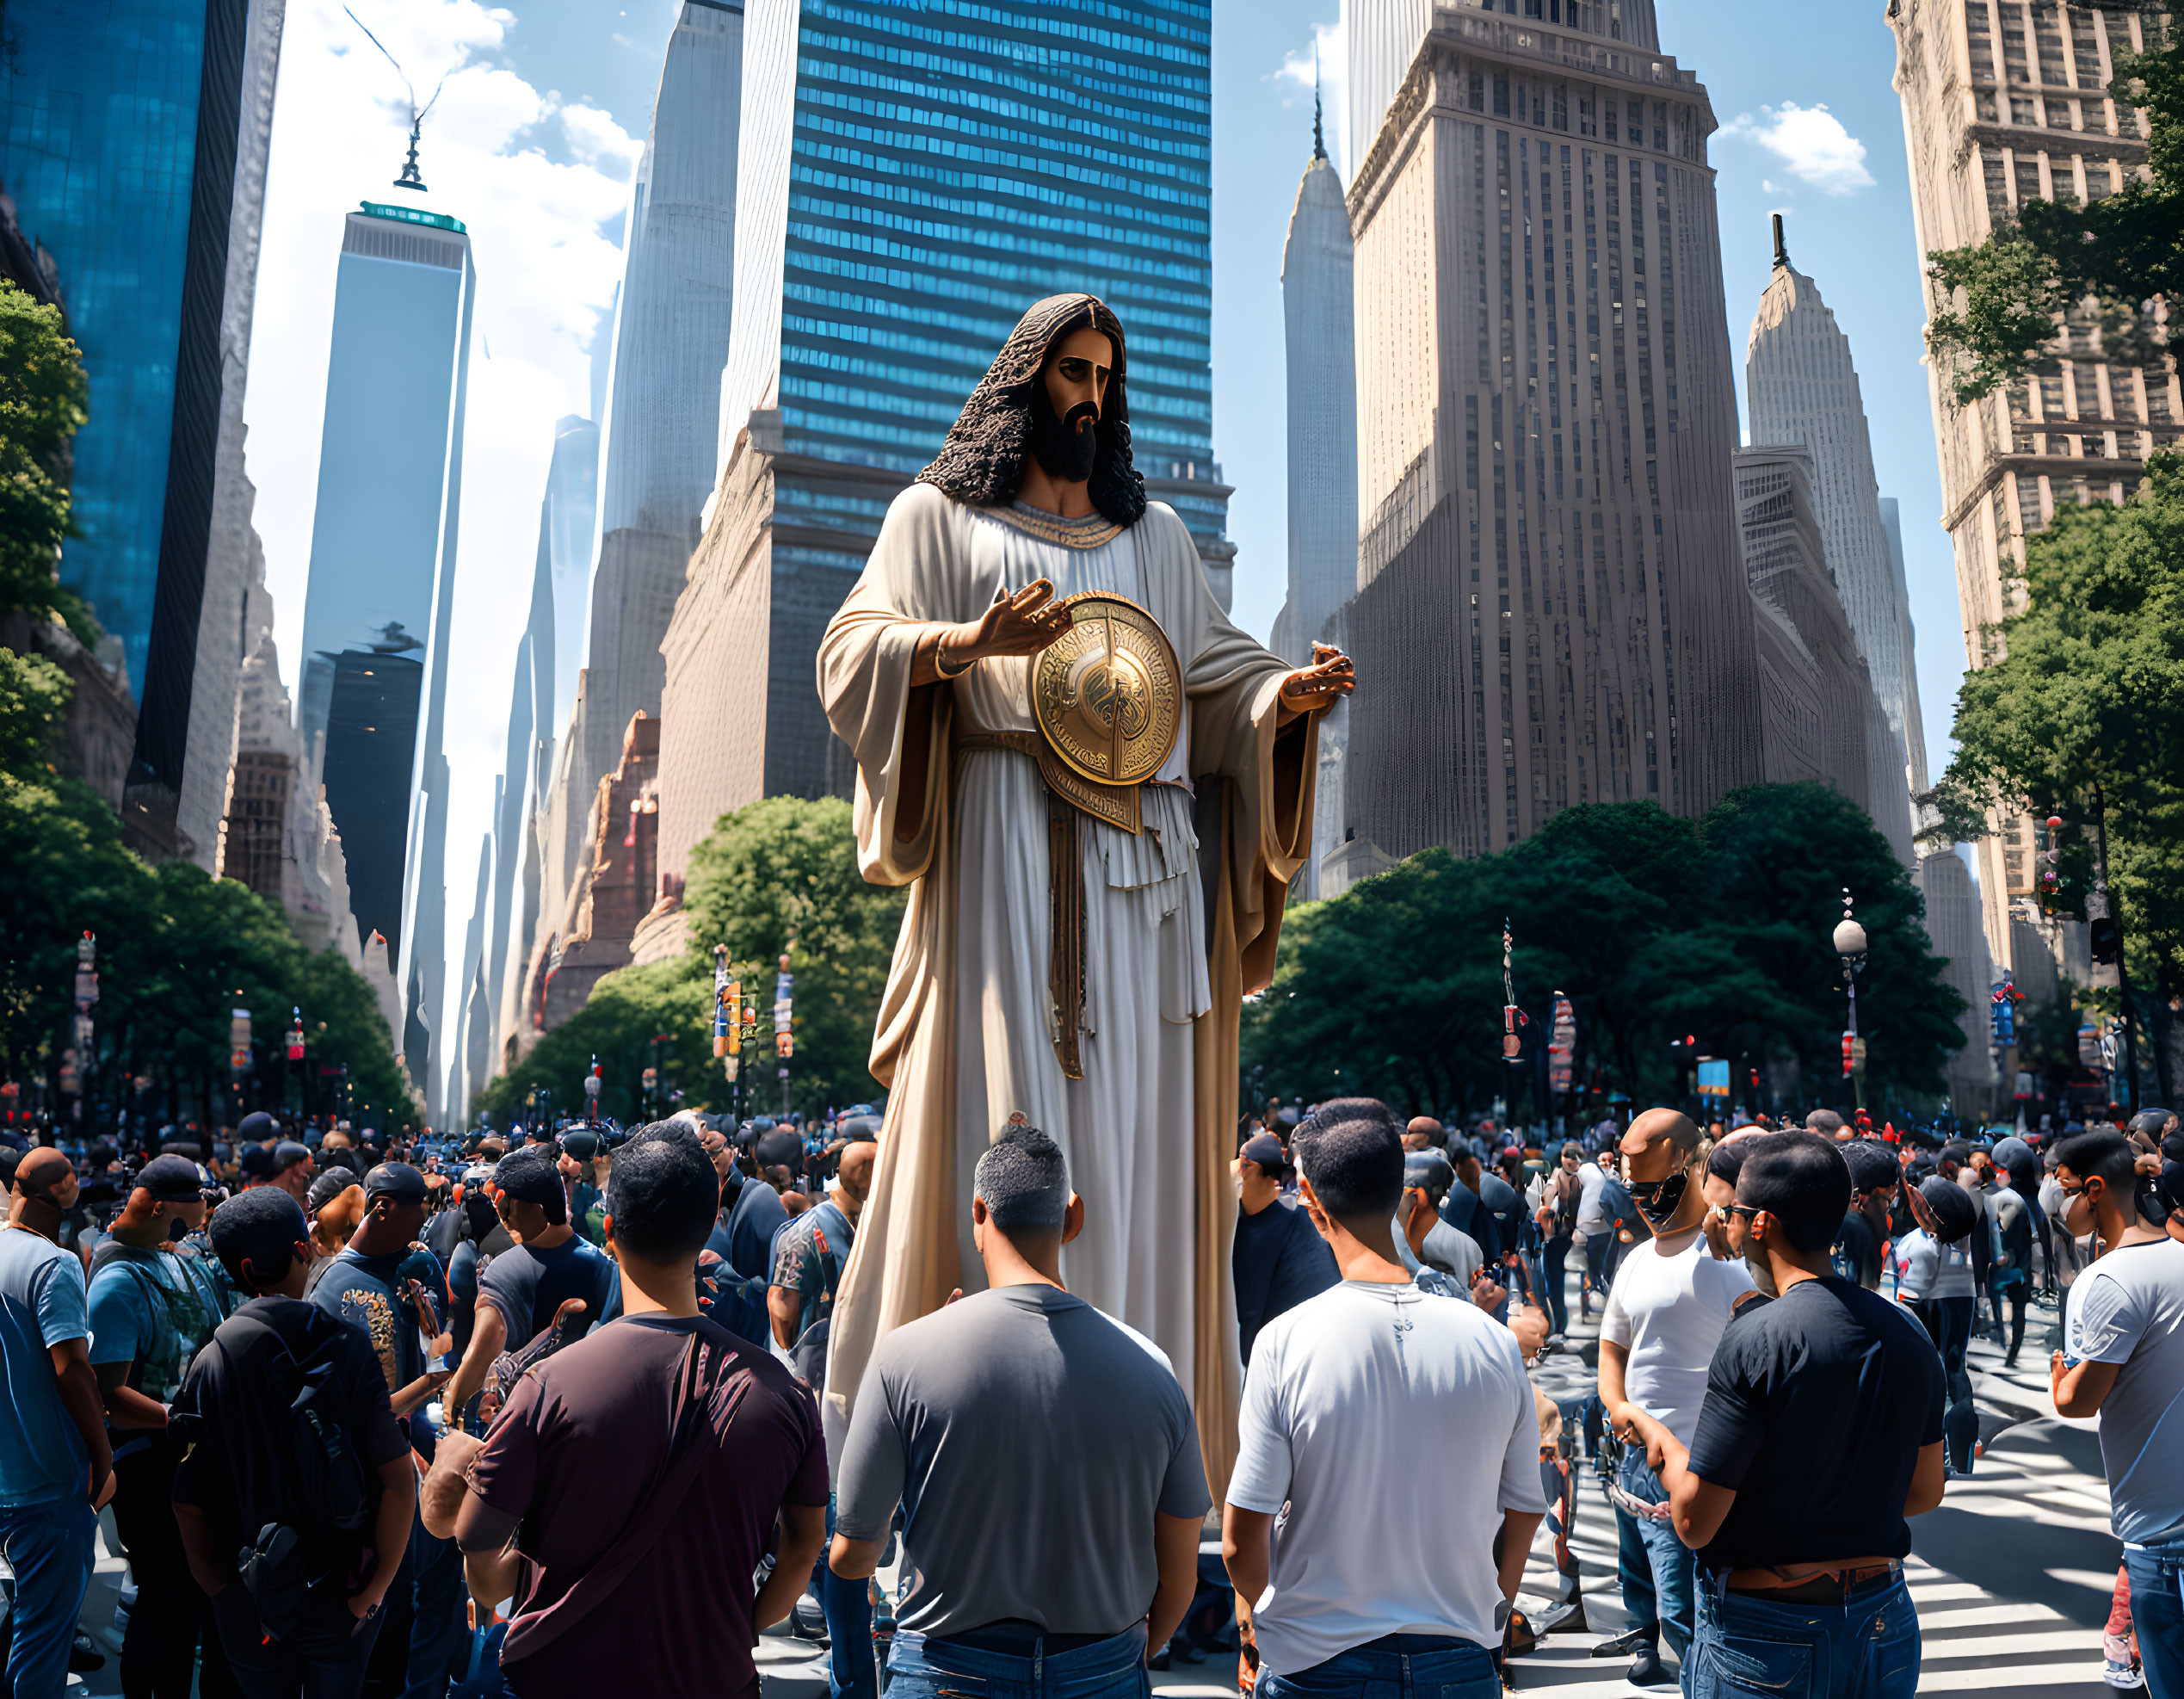 The Apparition of Christ in New York City